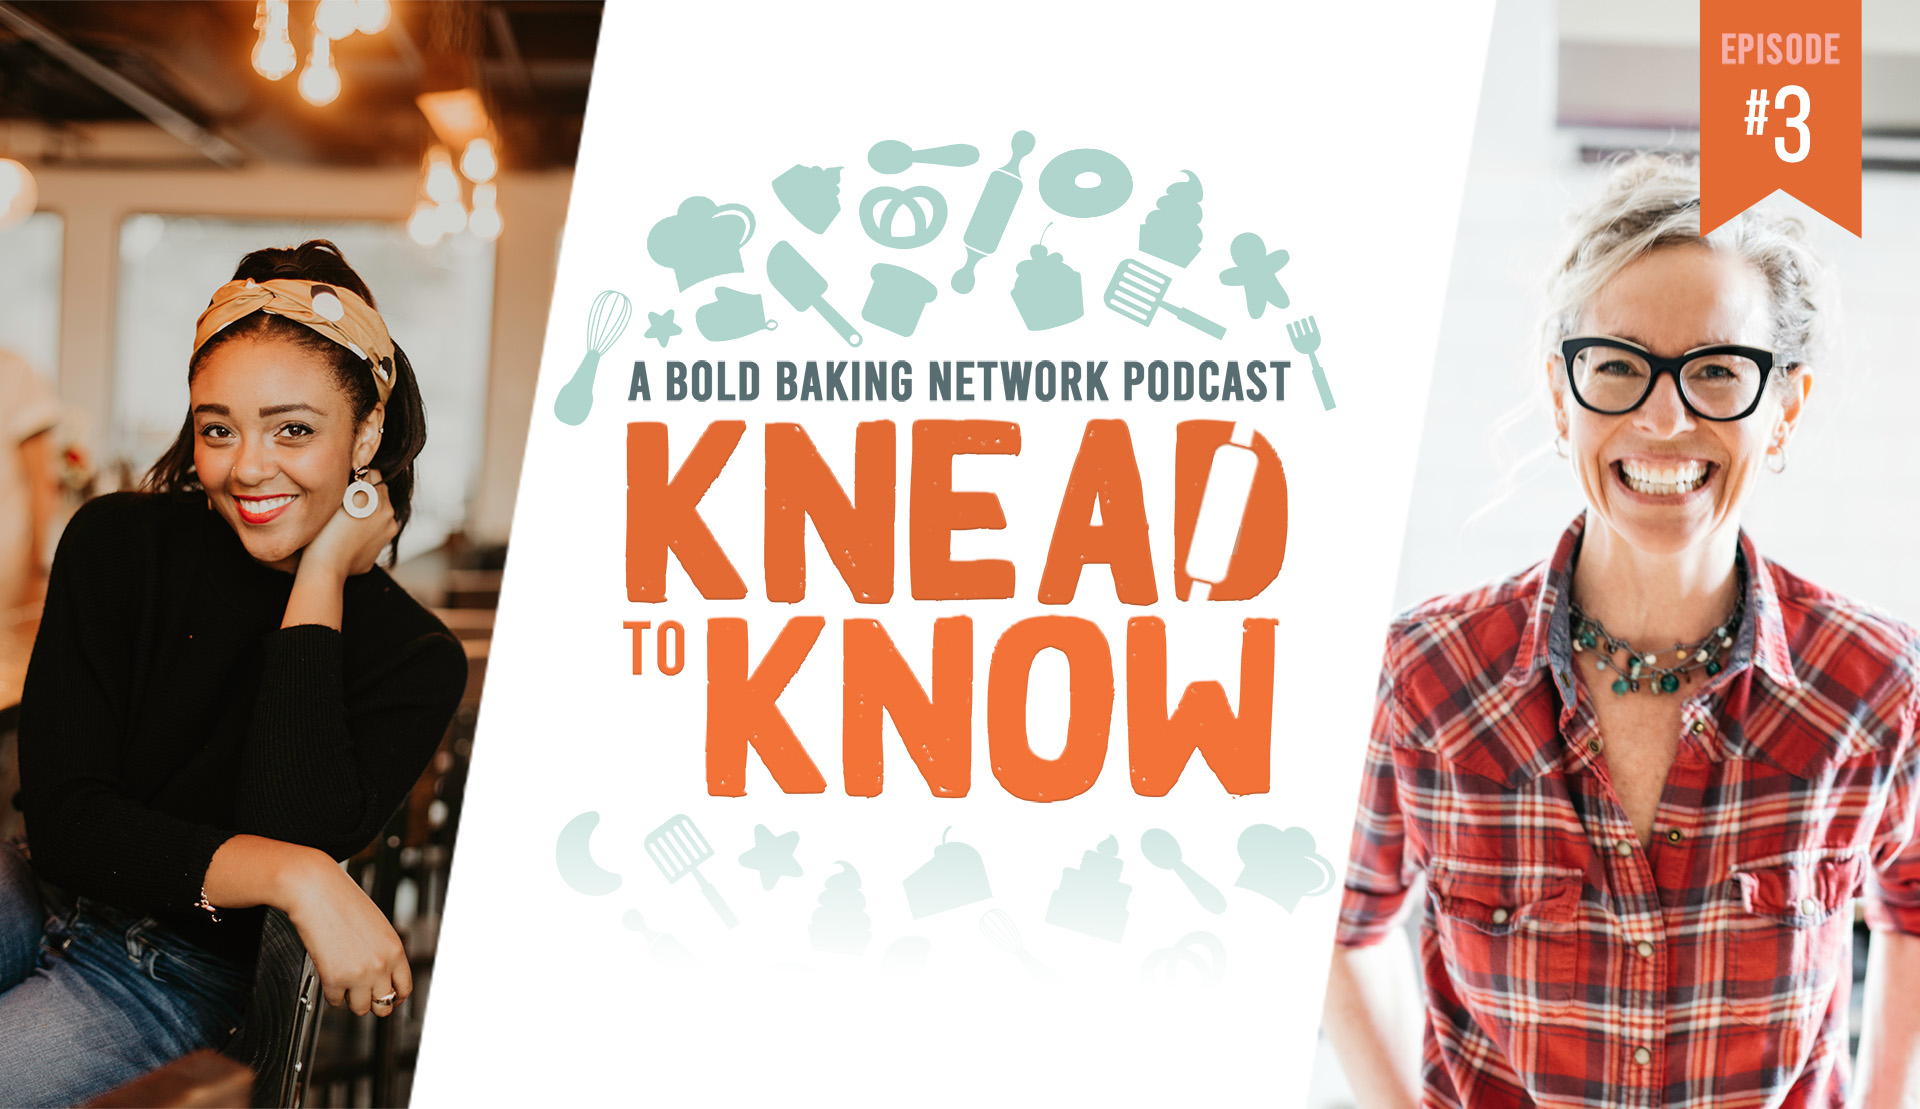 Knead to Know Episode 3